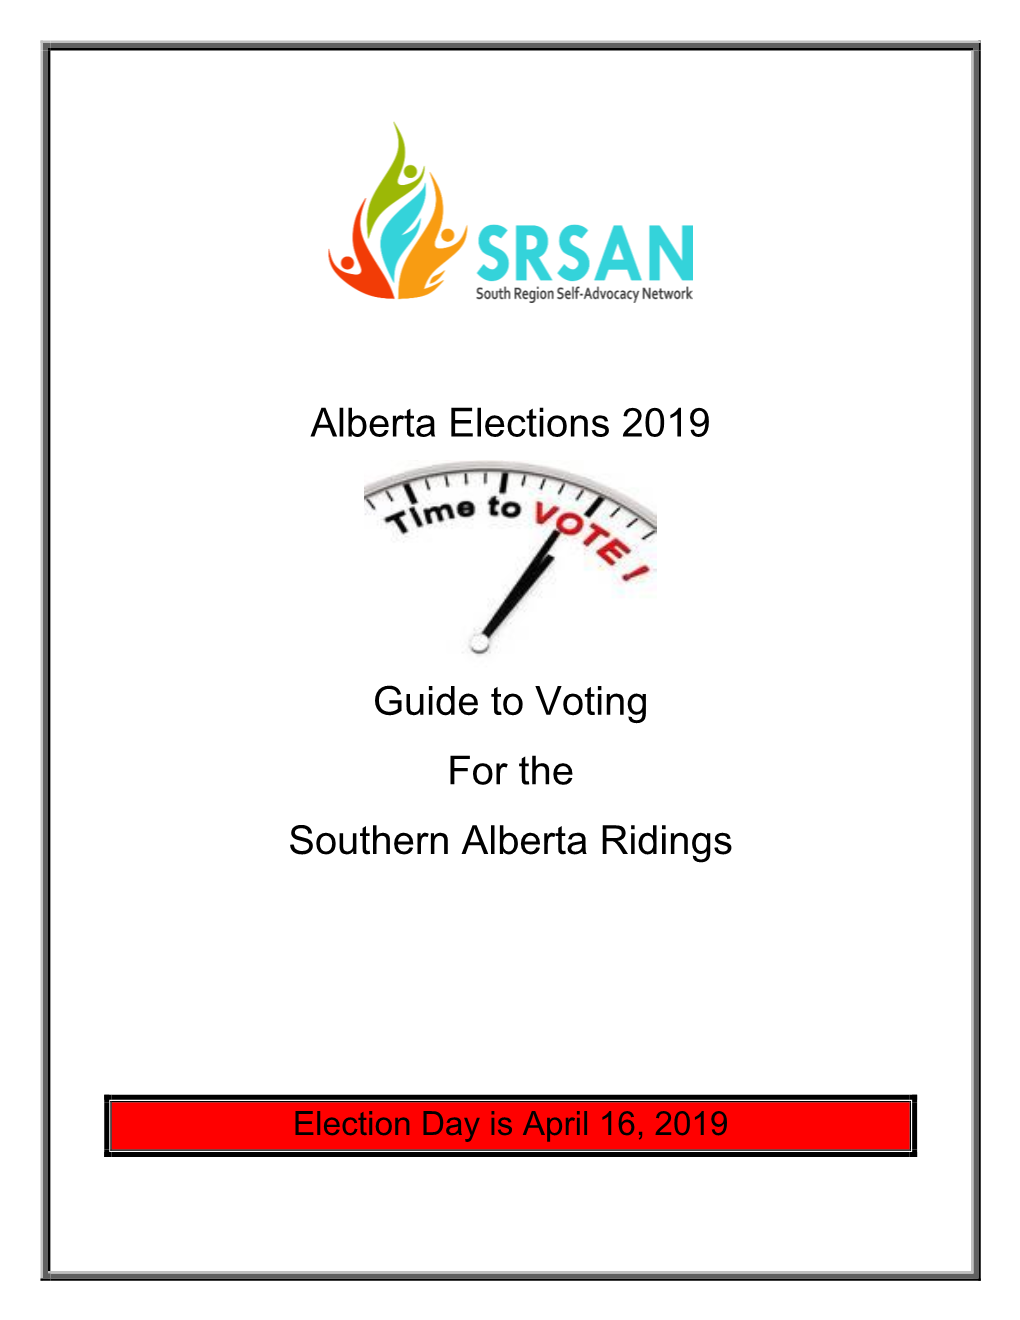 Alberta Elections 2019 Guide to Voting for the Southern Alberta Ridings